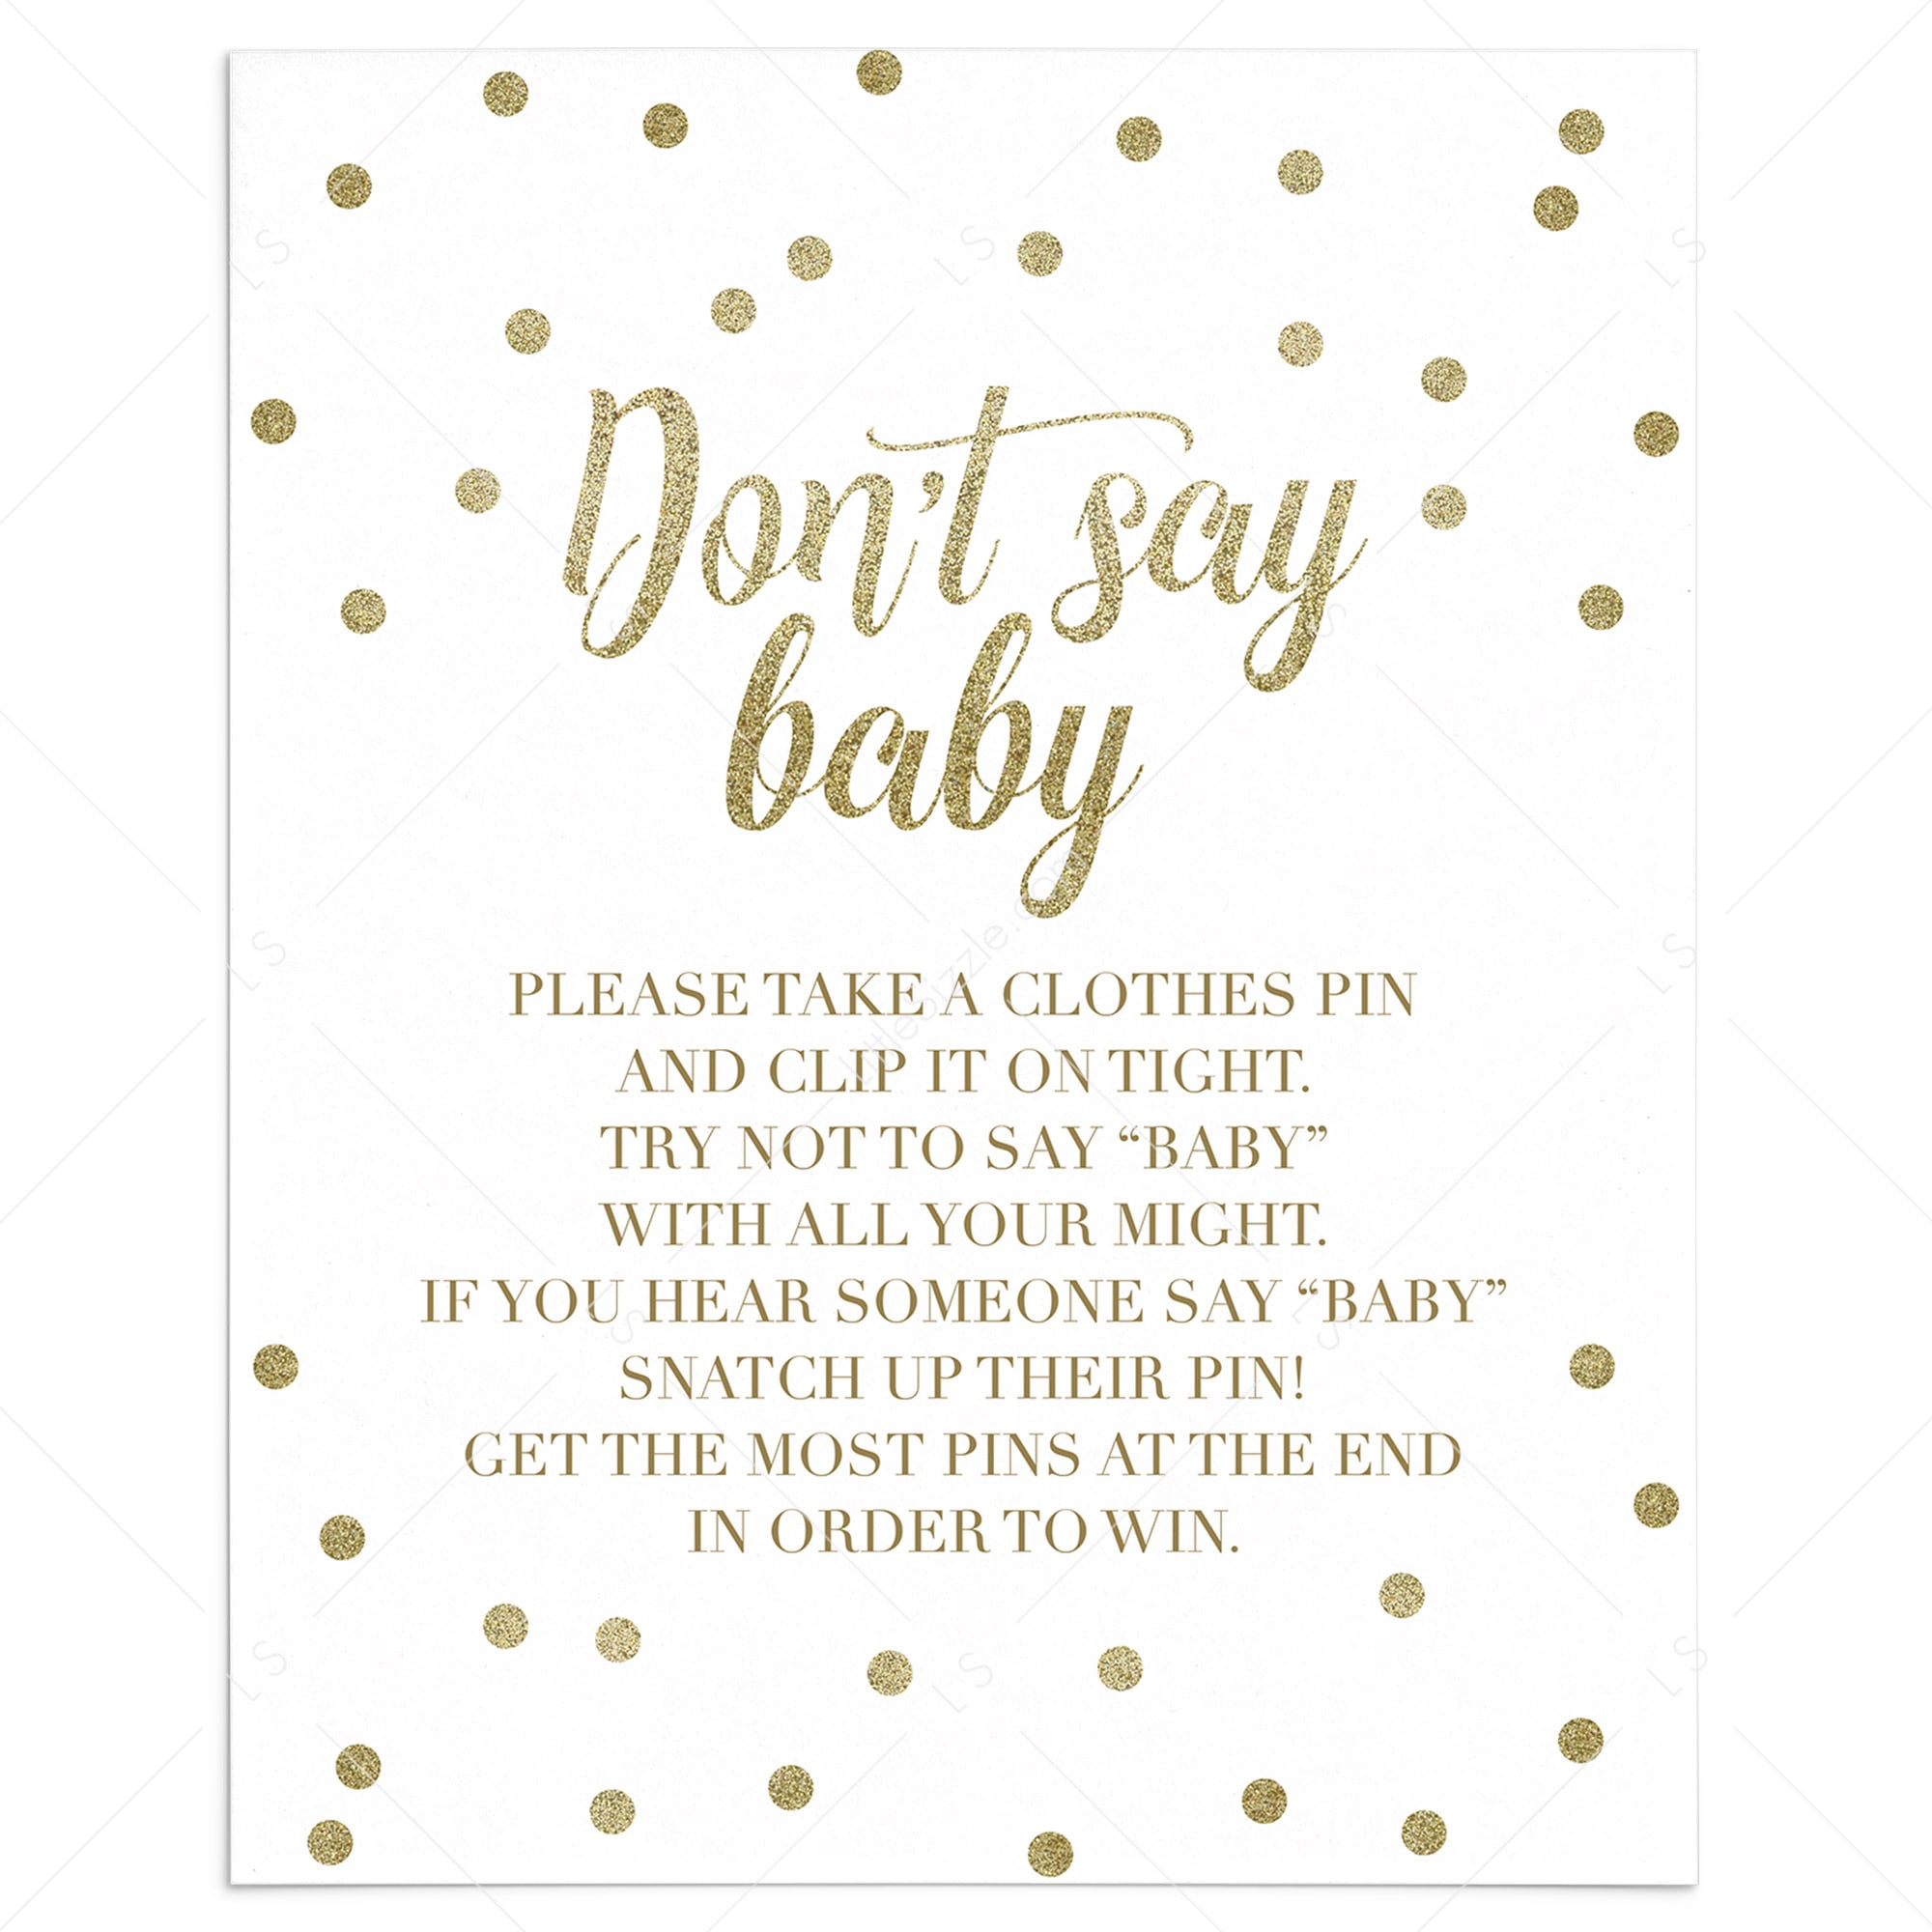 Dont say baby clothespin game for neutral baby shower by LittleSizzle